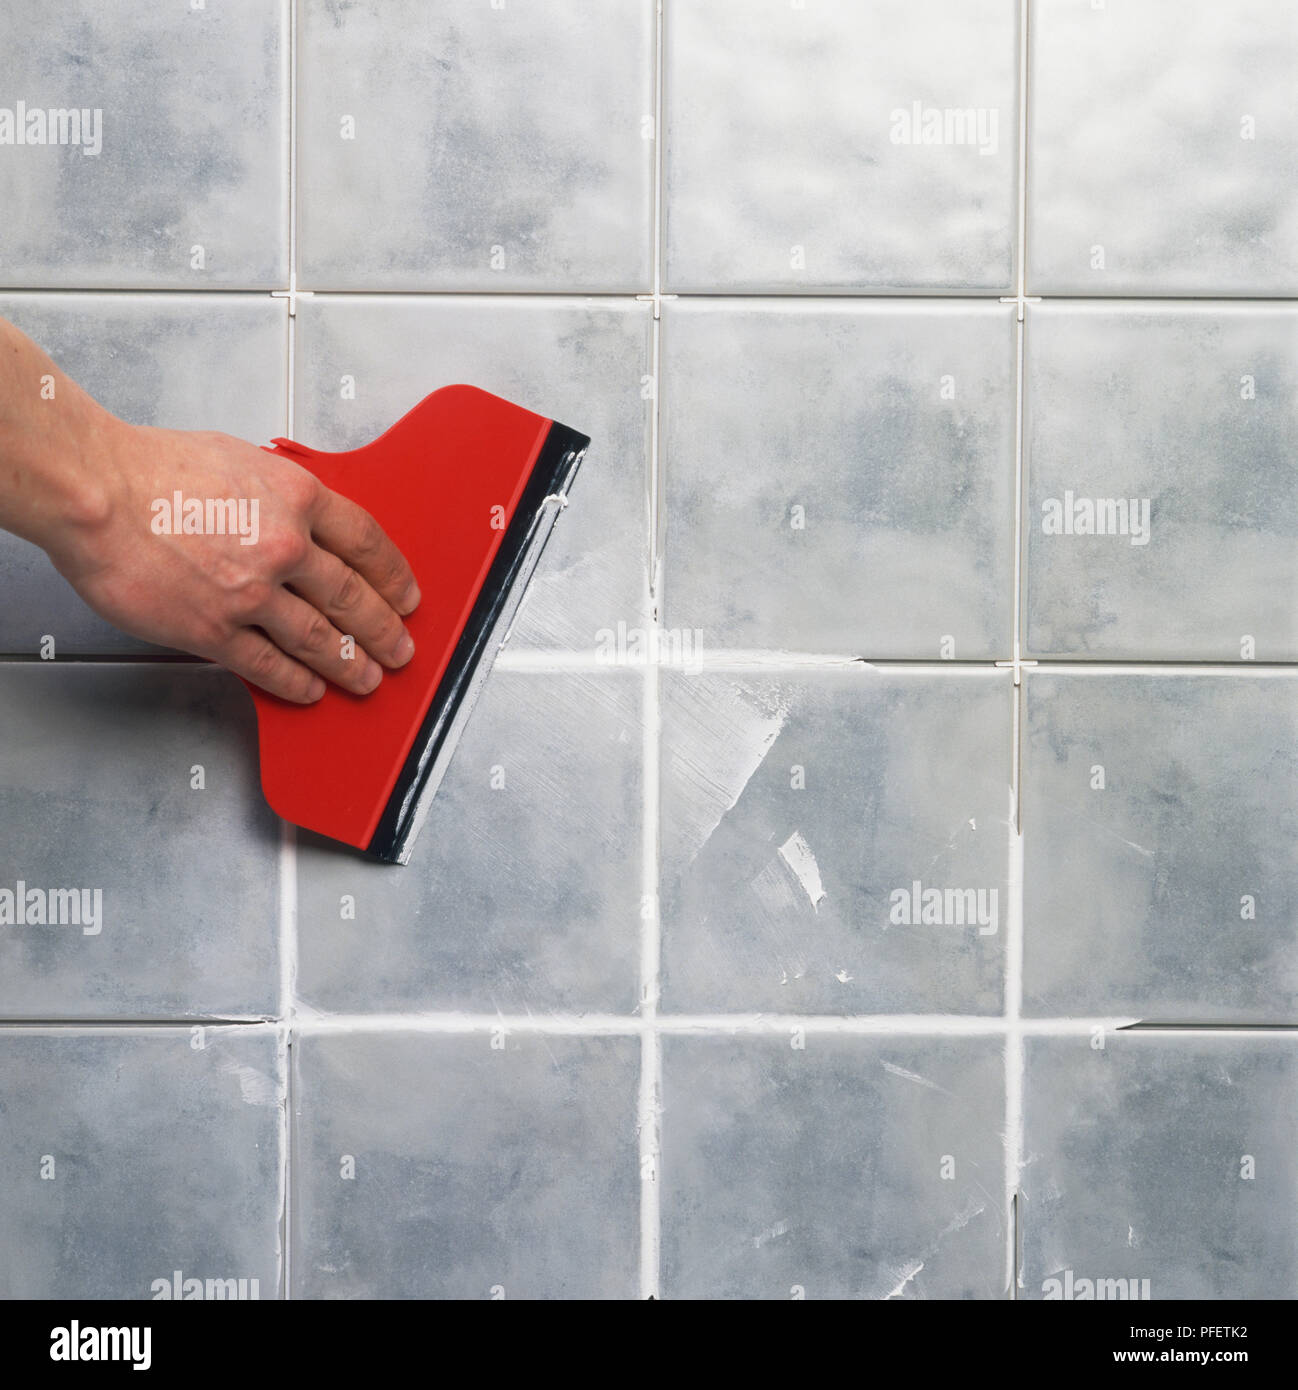 Grout being applied to tiles using a squeegee. Stock Photo